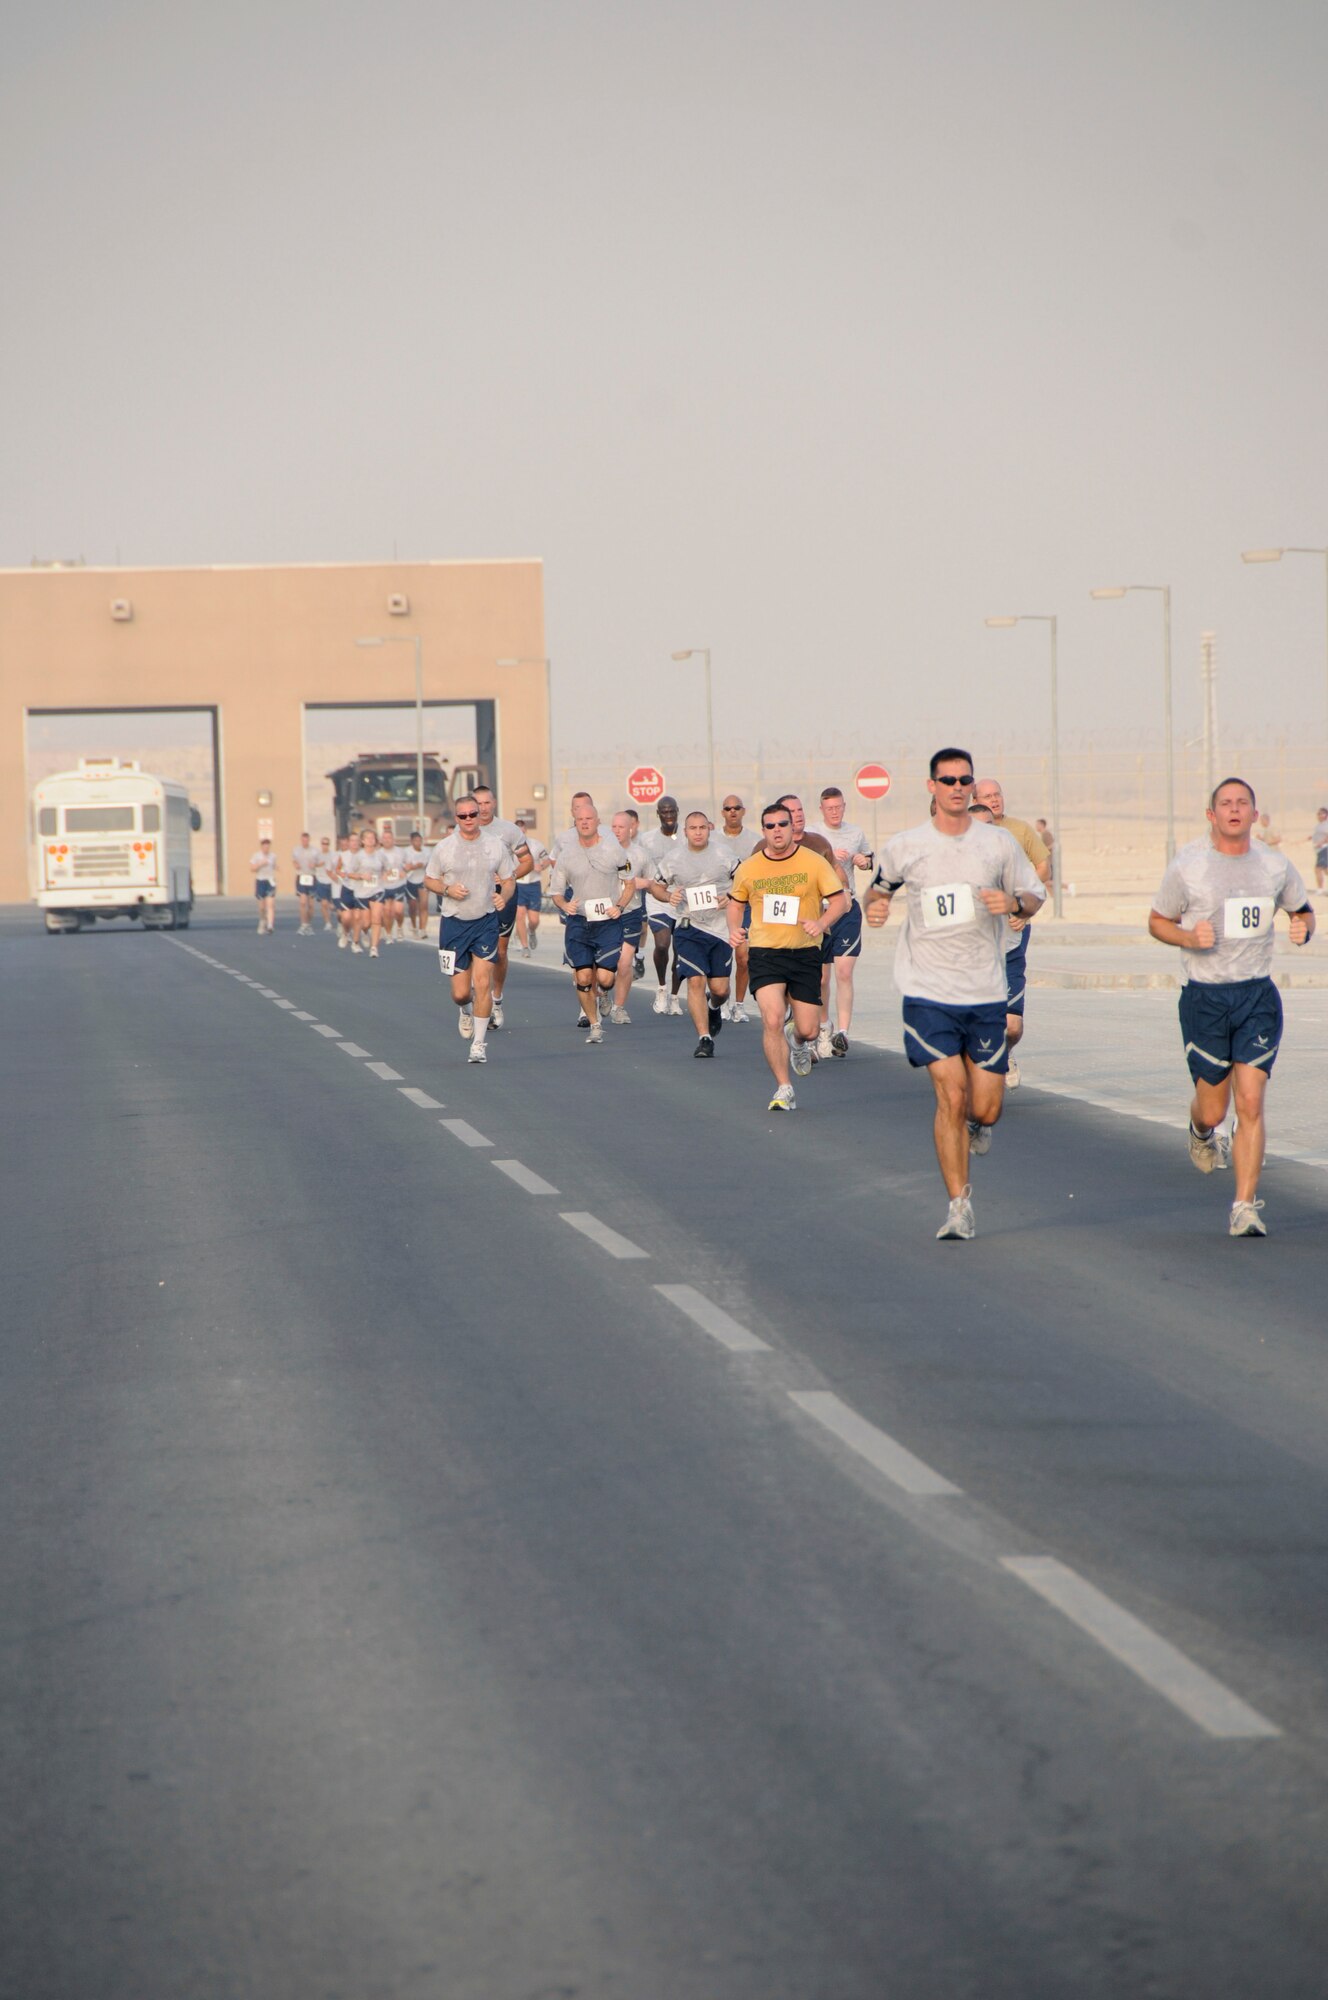 Runners endure suffocating heat and humidity in the “Run for the Fallen 5K” sponsored by the 379th Expeditionary Force Support Squadron Sunday, Aug. 17, 2008, at an undisclosed air base in Southwest Asia.  183 runners from the Army, Navy, Air Force and Marines as well as coalition partners participated in the run honoring those who have made the ultimate sacrifice in the Global War on Terrorism. (U.S. Air Force photo by Tech. Sgt. Michael Boquette/Released)